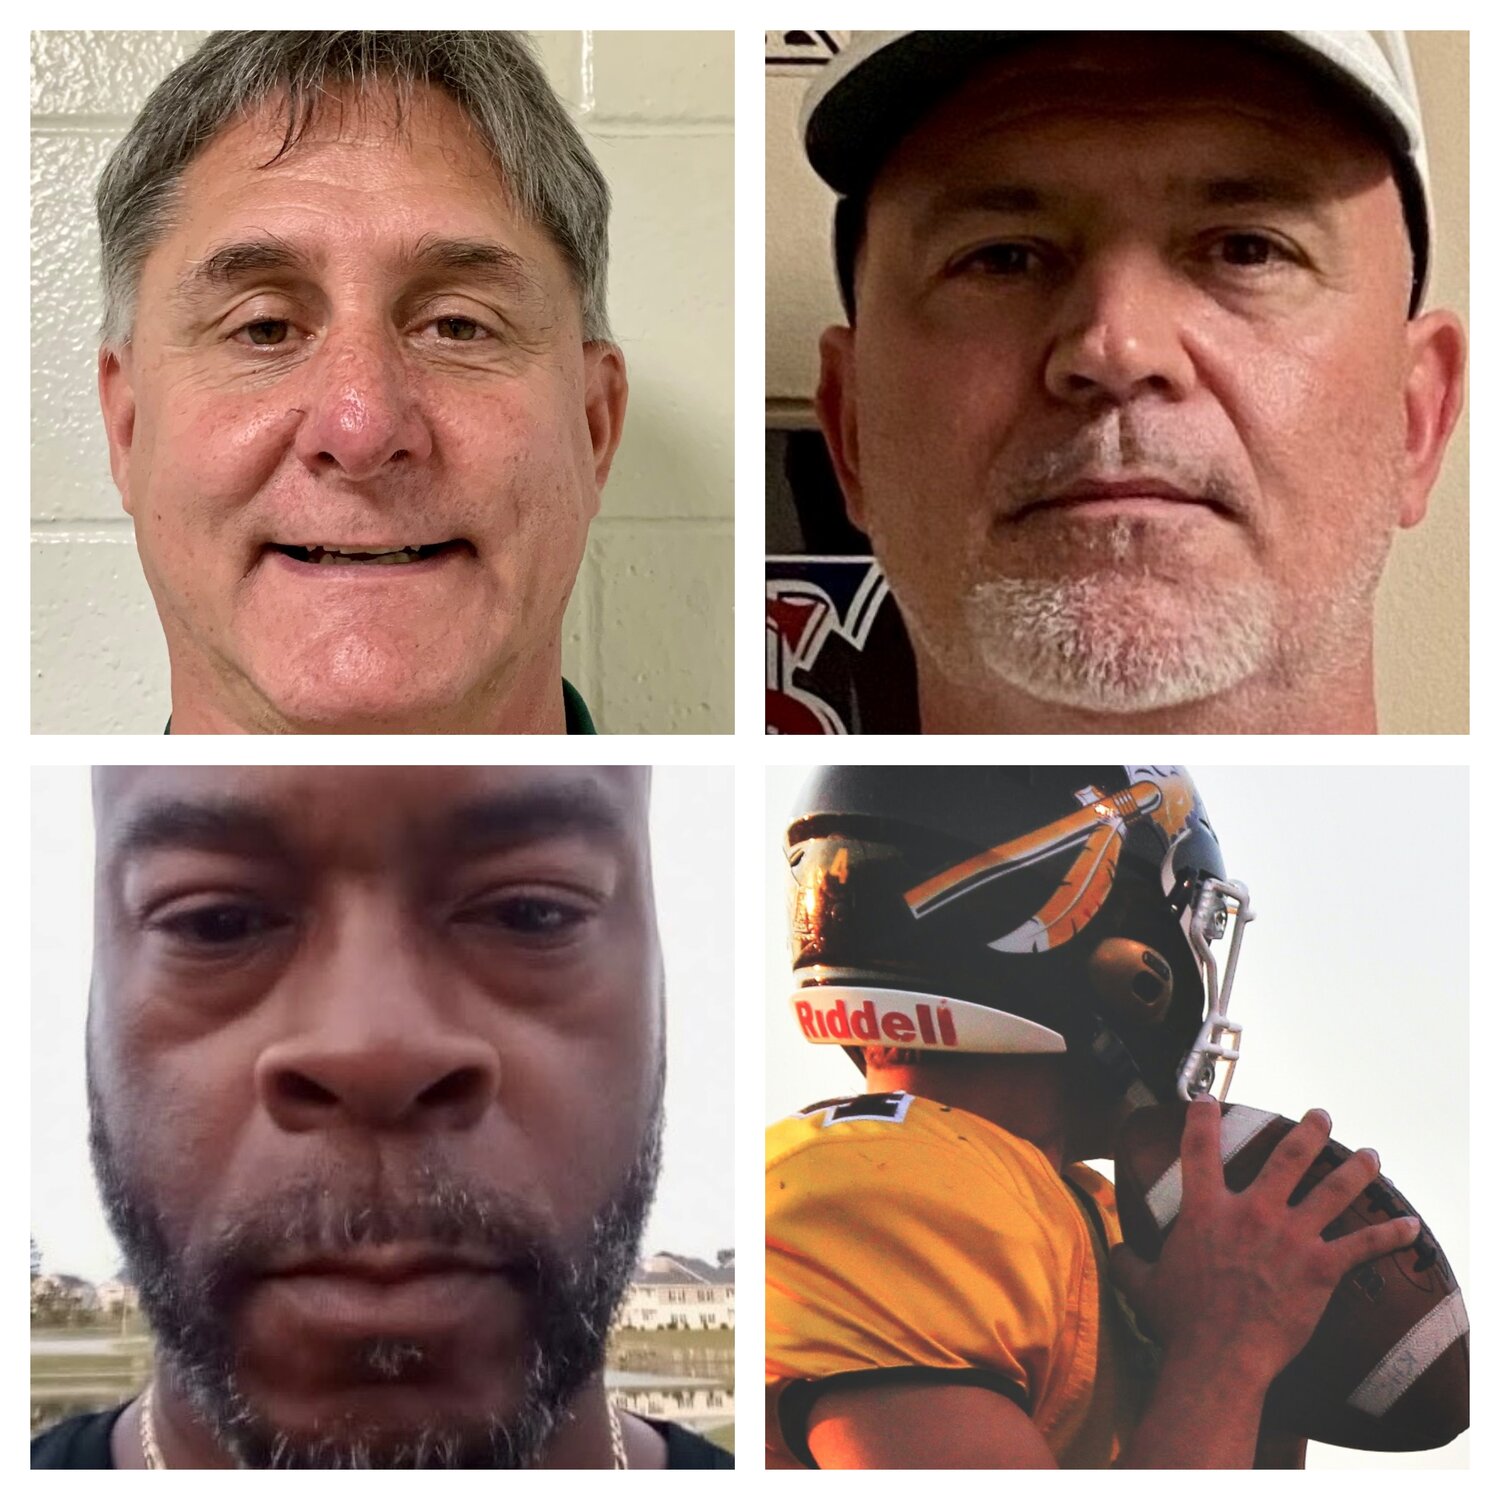 From top left, Pine Forest football coach Bill Sochovka; Terry Sanford football coach Bruce McClelland; and Westover football coach Ernest King.